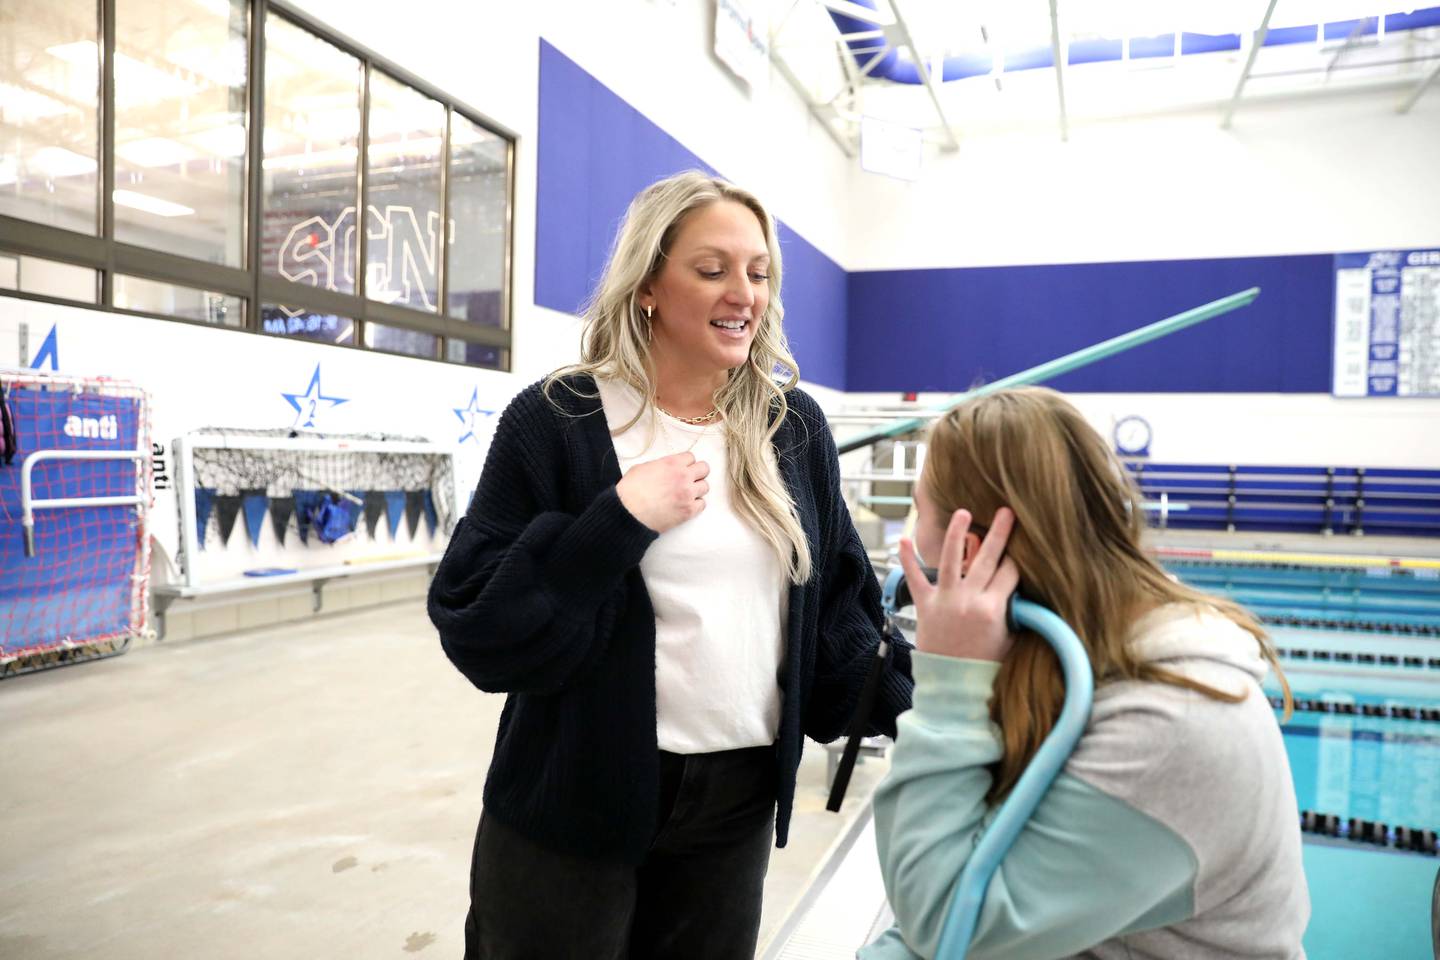 St. Charles North High School Teaching Assistant Adrienne Geiseman stepped in this fall to support student Maya Townsend, who sought to participate in swimming for the very first time. Geiseman provided Maya with direct, unwavering support throughout the season at practices and meets.